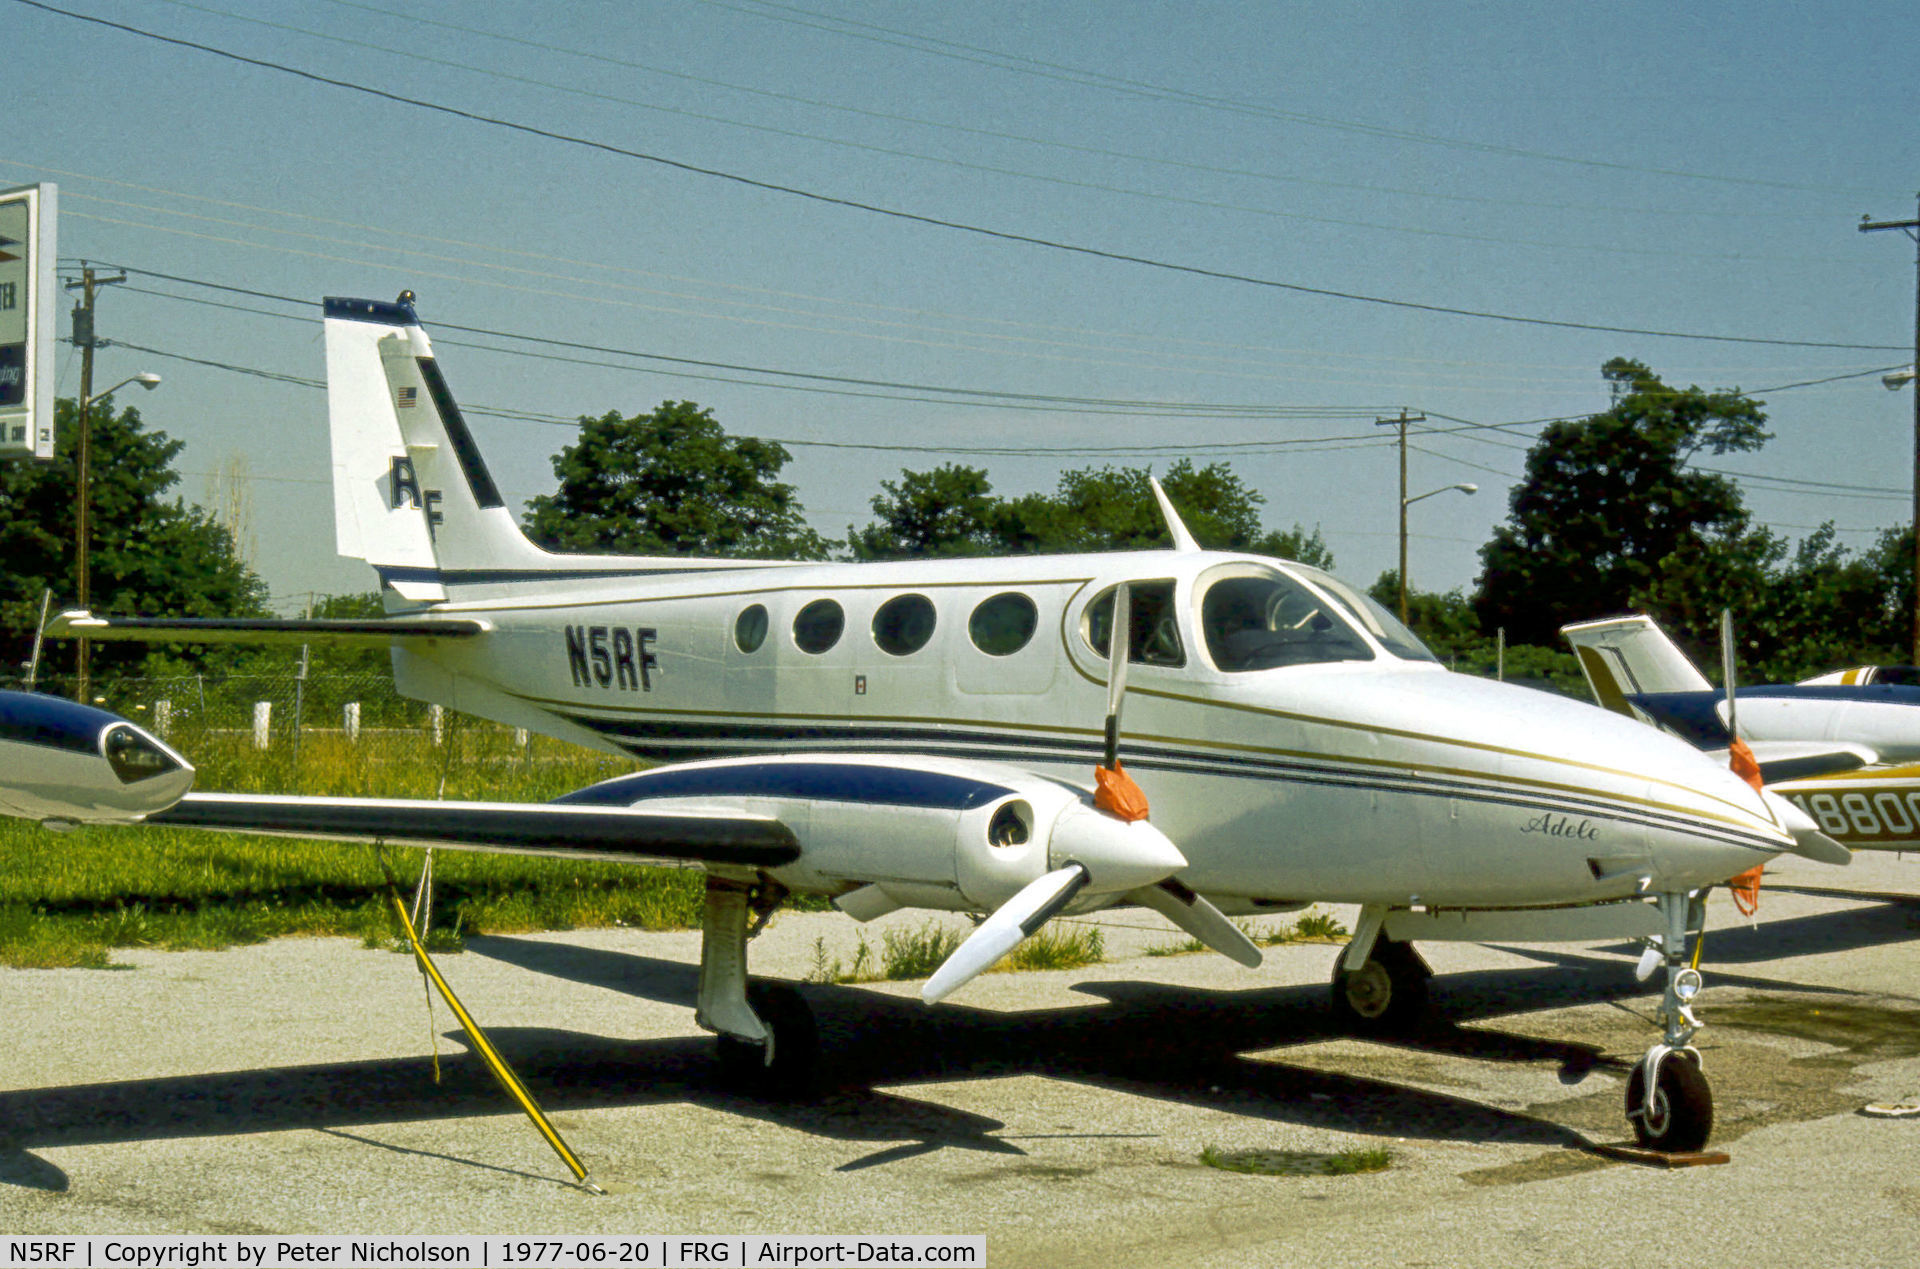 N5RF, 1973 Cessna 340 C/N 340-0307, Cessna 340 named Adele parked at Republic Airport on Long Island in the Summer of 1977.